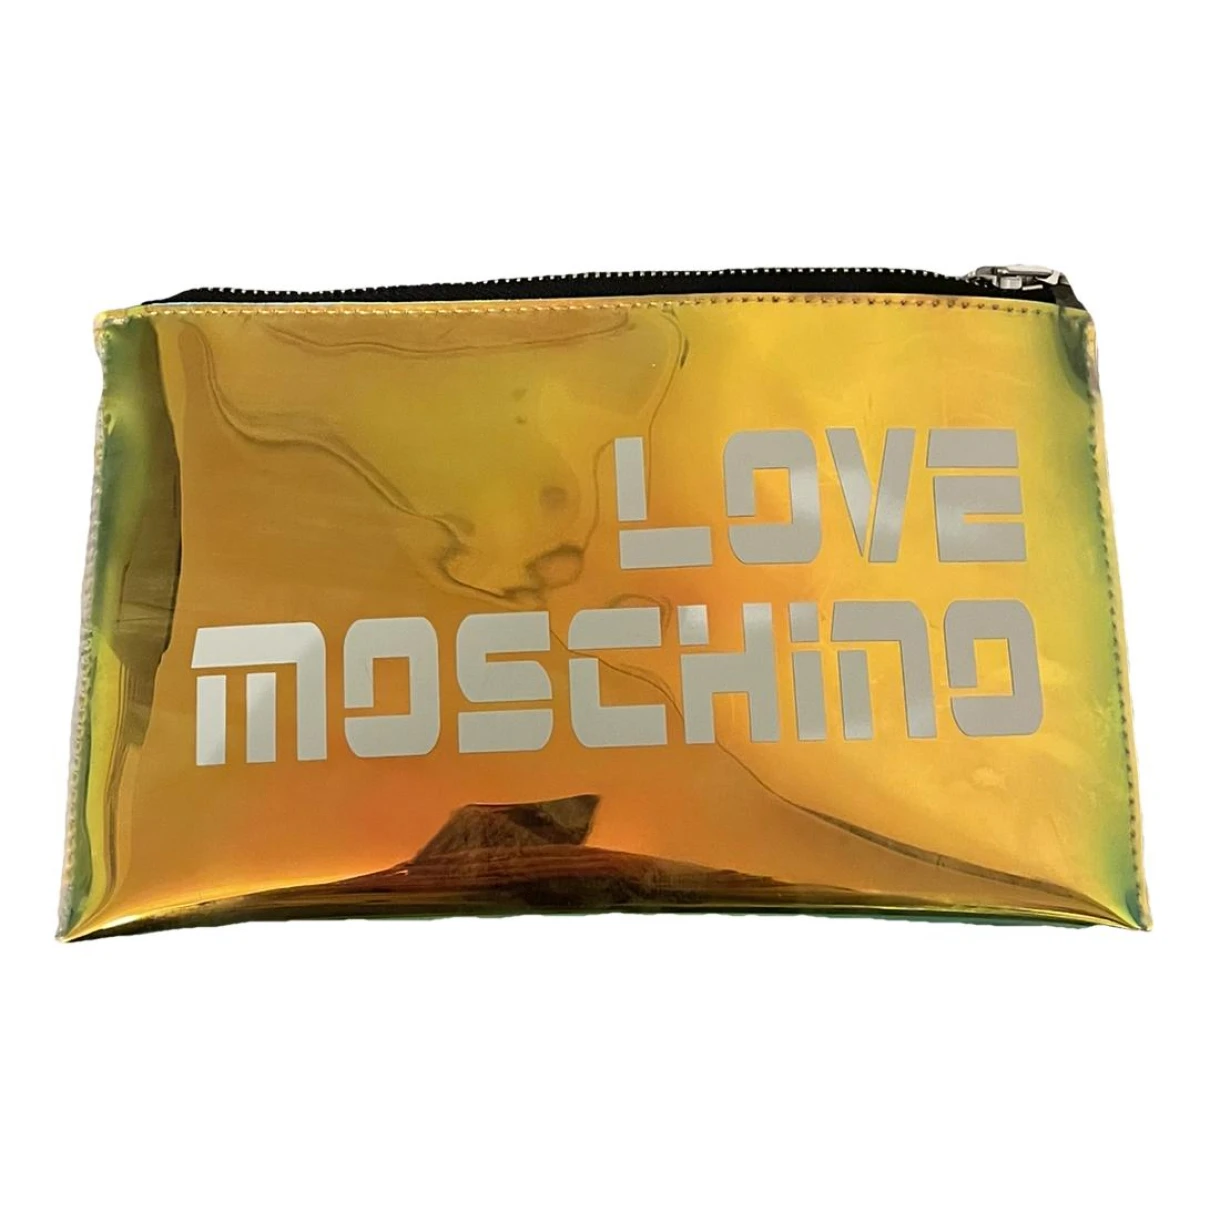 bags Moschino Love clutch bags for Female Plastic. Used condition